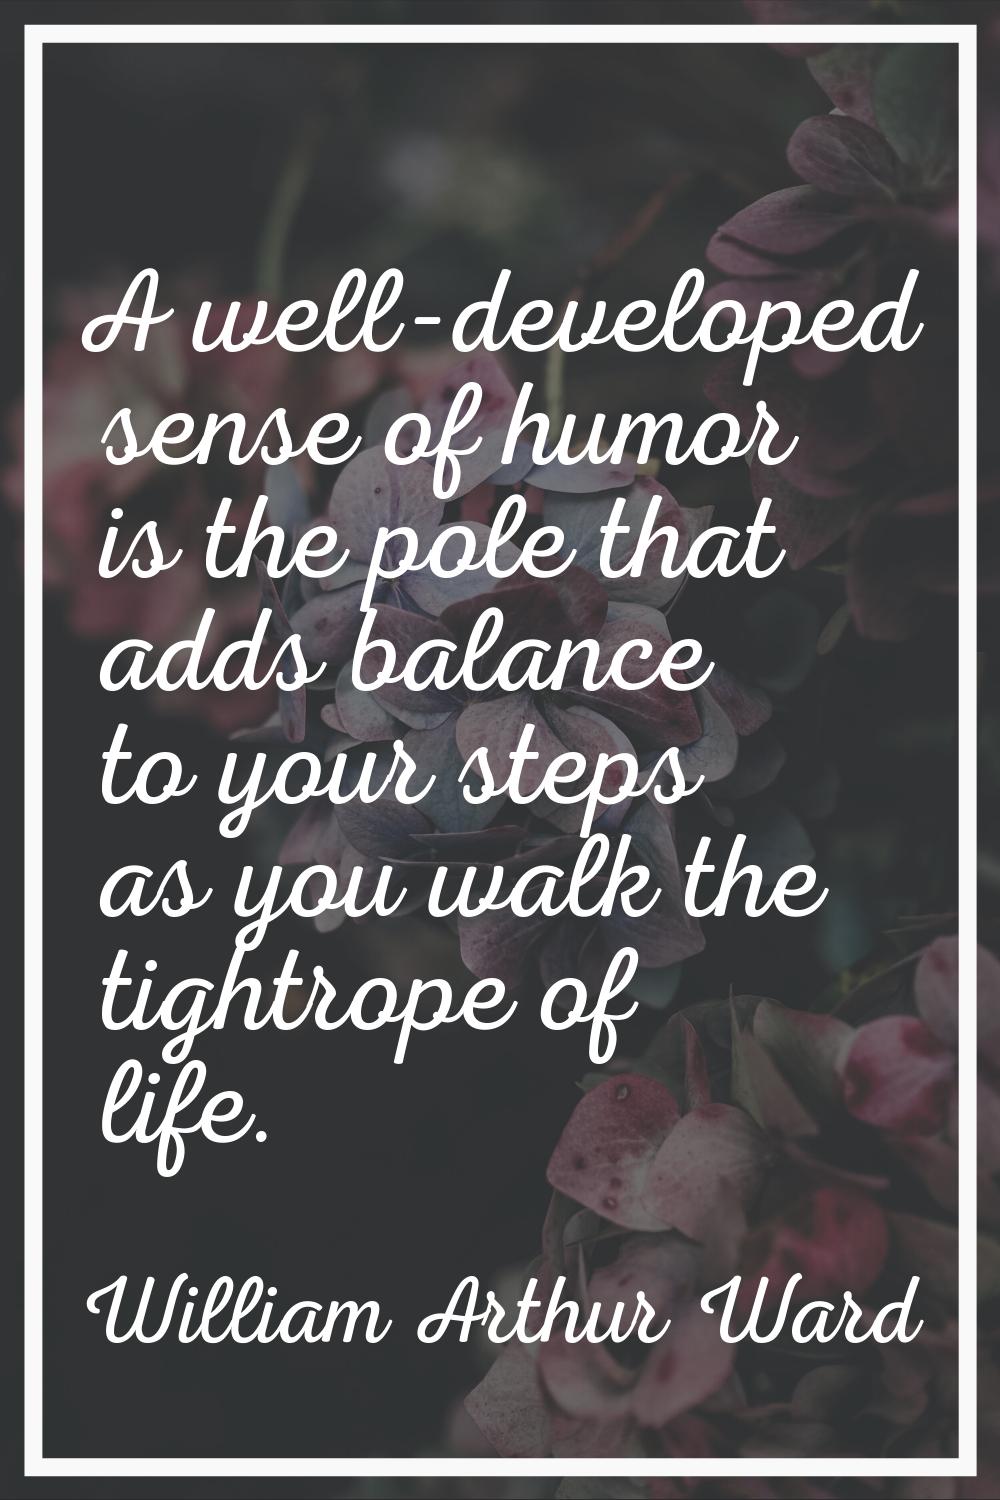 A well-developed sense of humor is the pole that adds balance to your steps as you walk the tightro